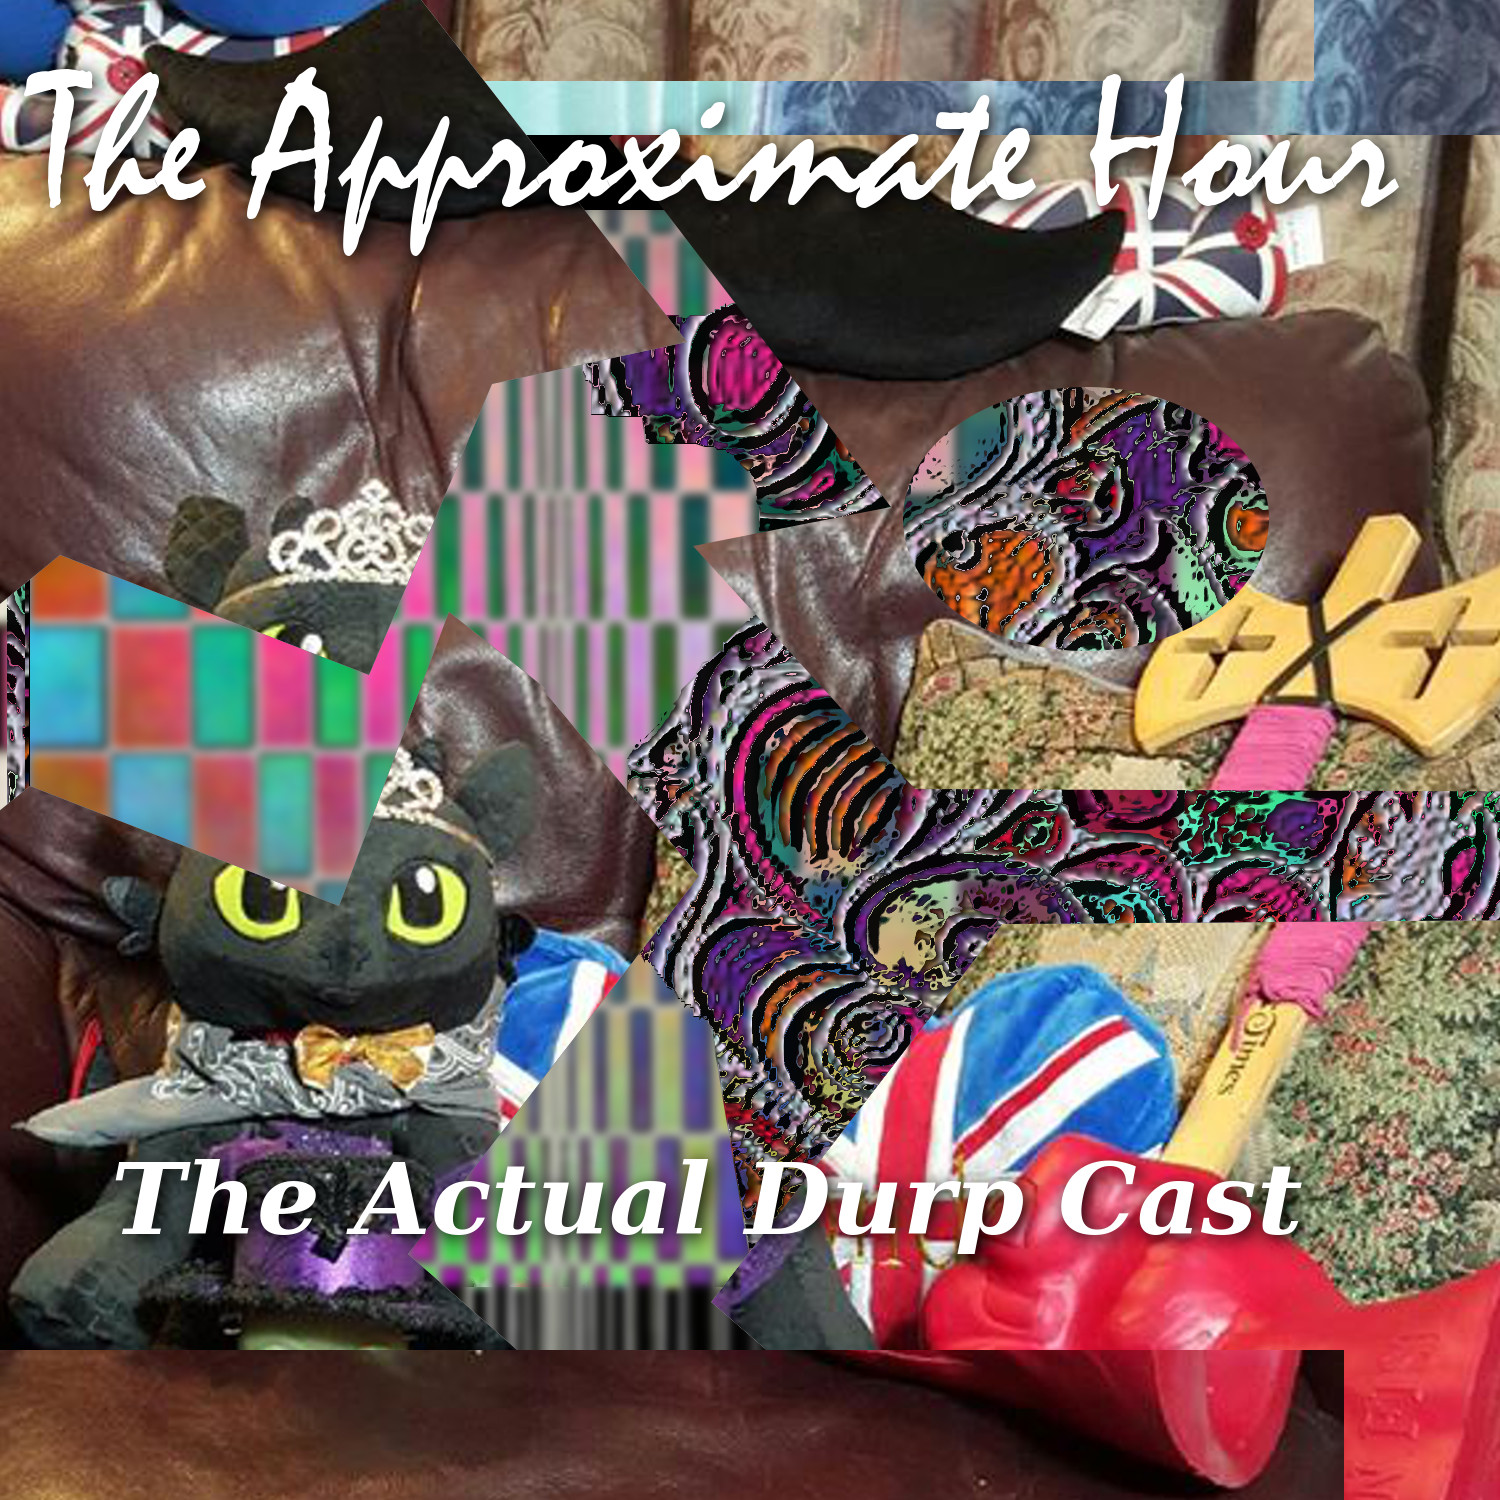 Special Edition 1 - The Derpcast... FOR REELZ!